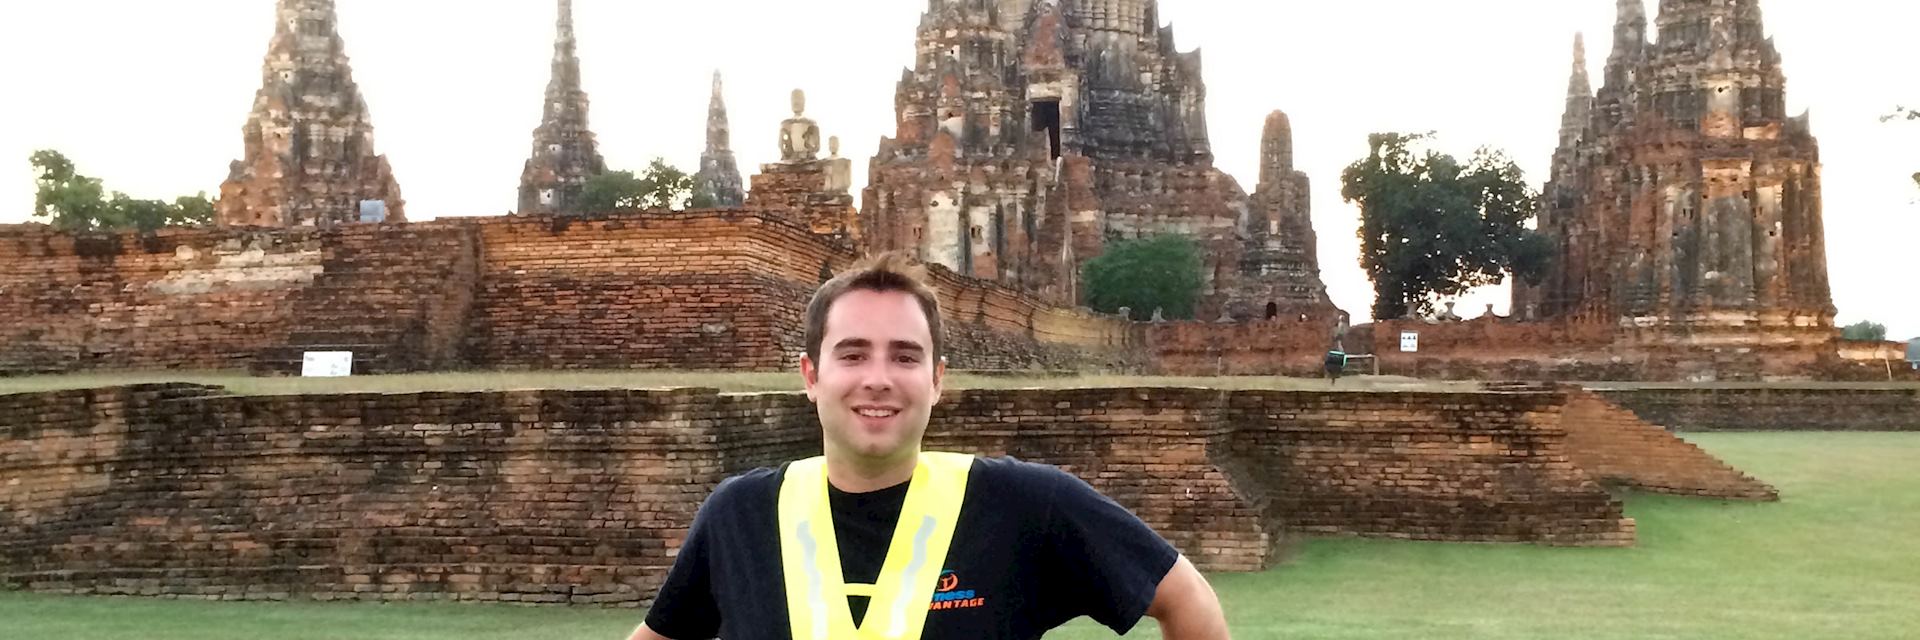 Matt on a bicycle excursion stops off at one of the ancient temples in Ayutthaya, Thailand